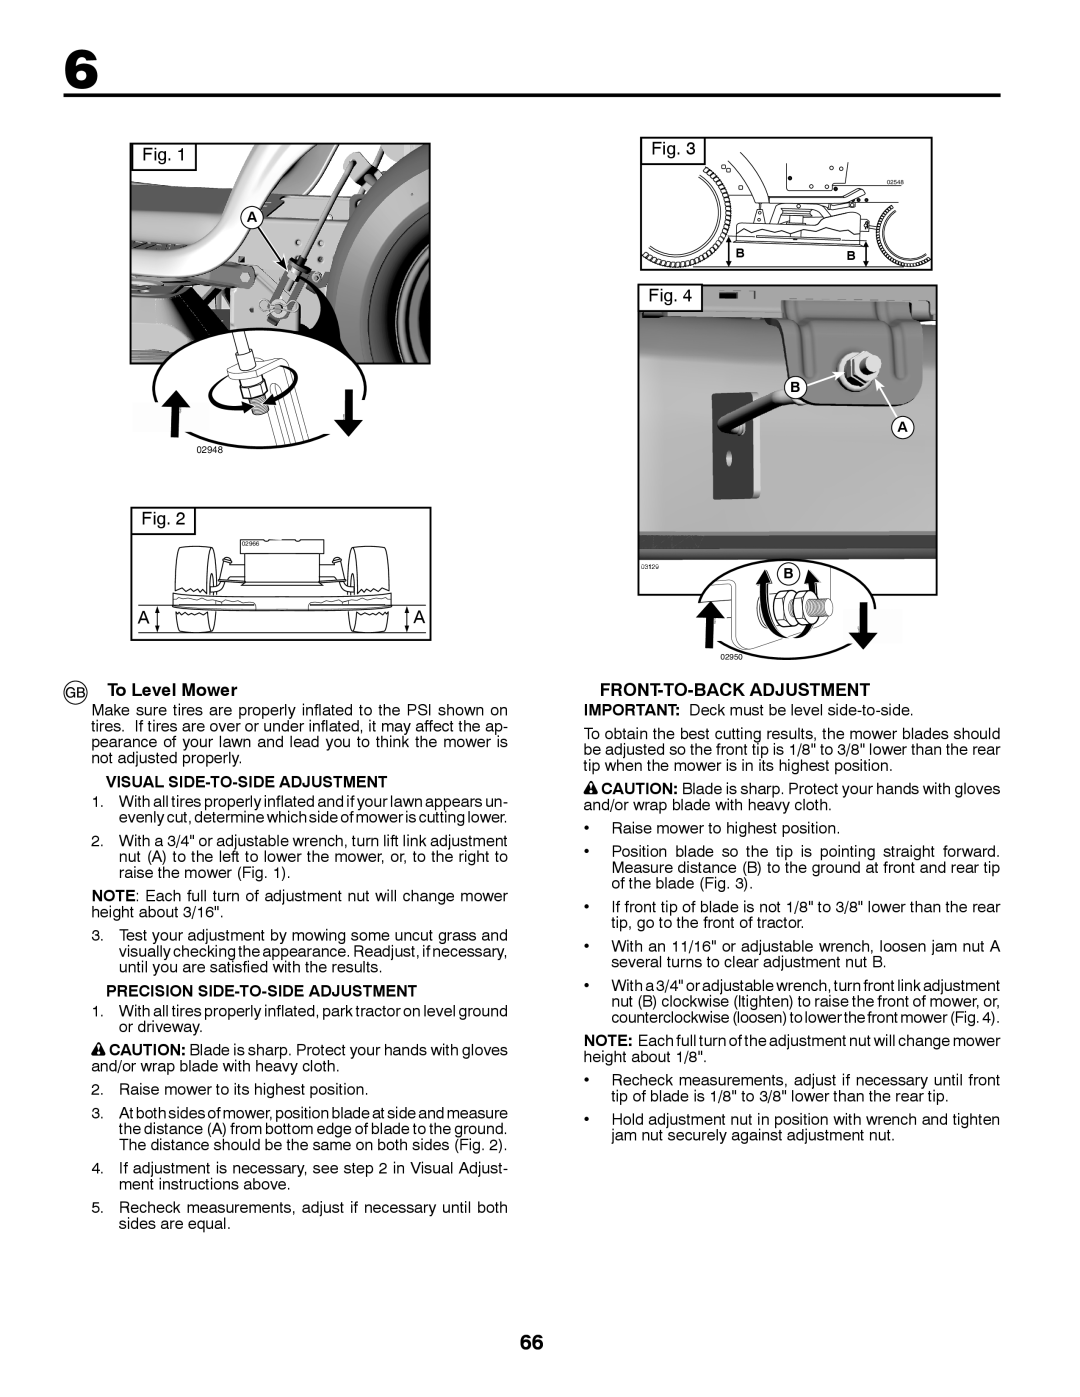 McCulloch 96041016500 instruction manual To Level Mower, Front-To-Back Adjustment, Visual Side-To-Side Adjustment 